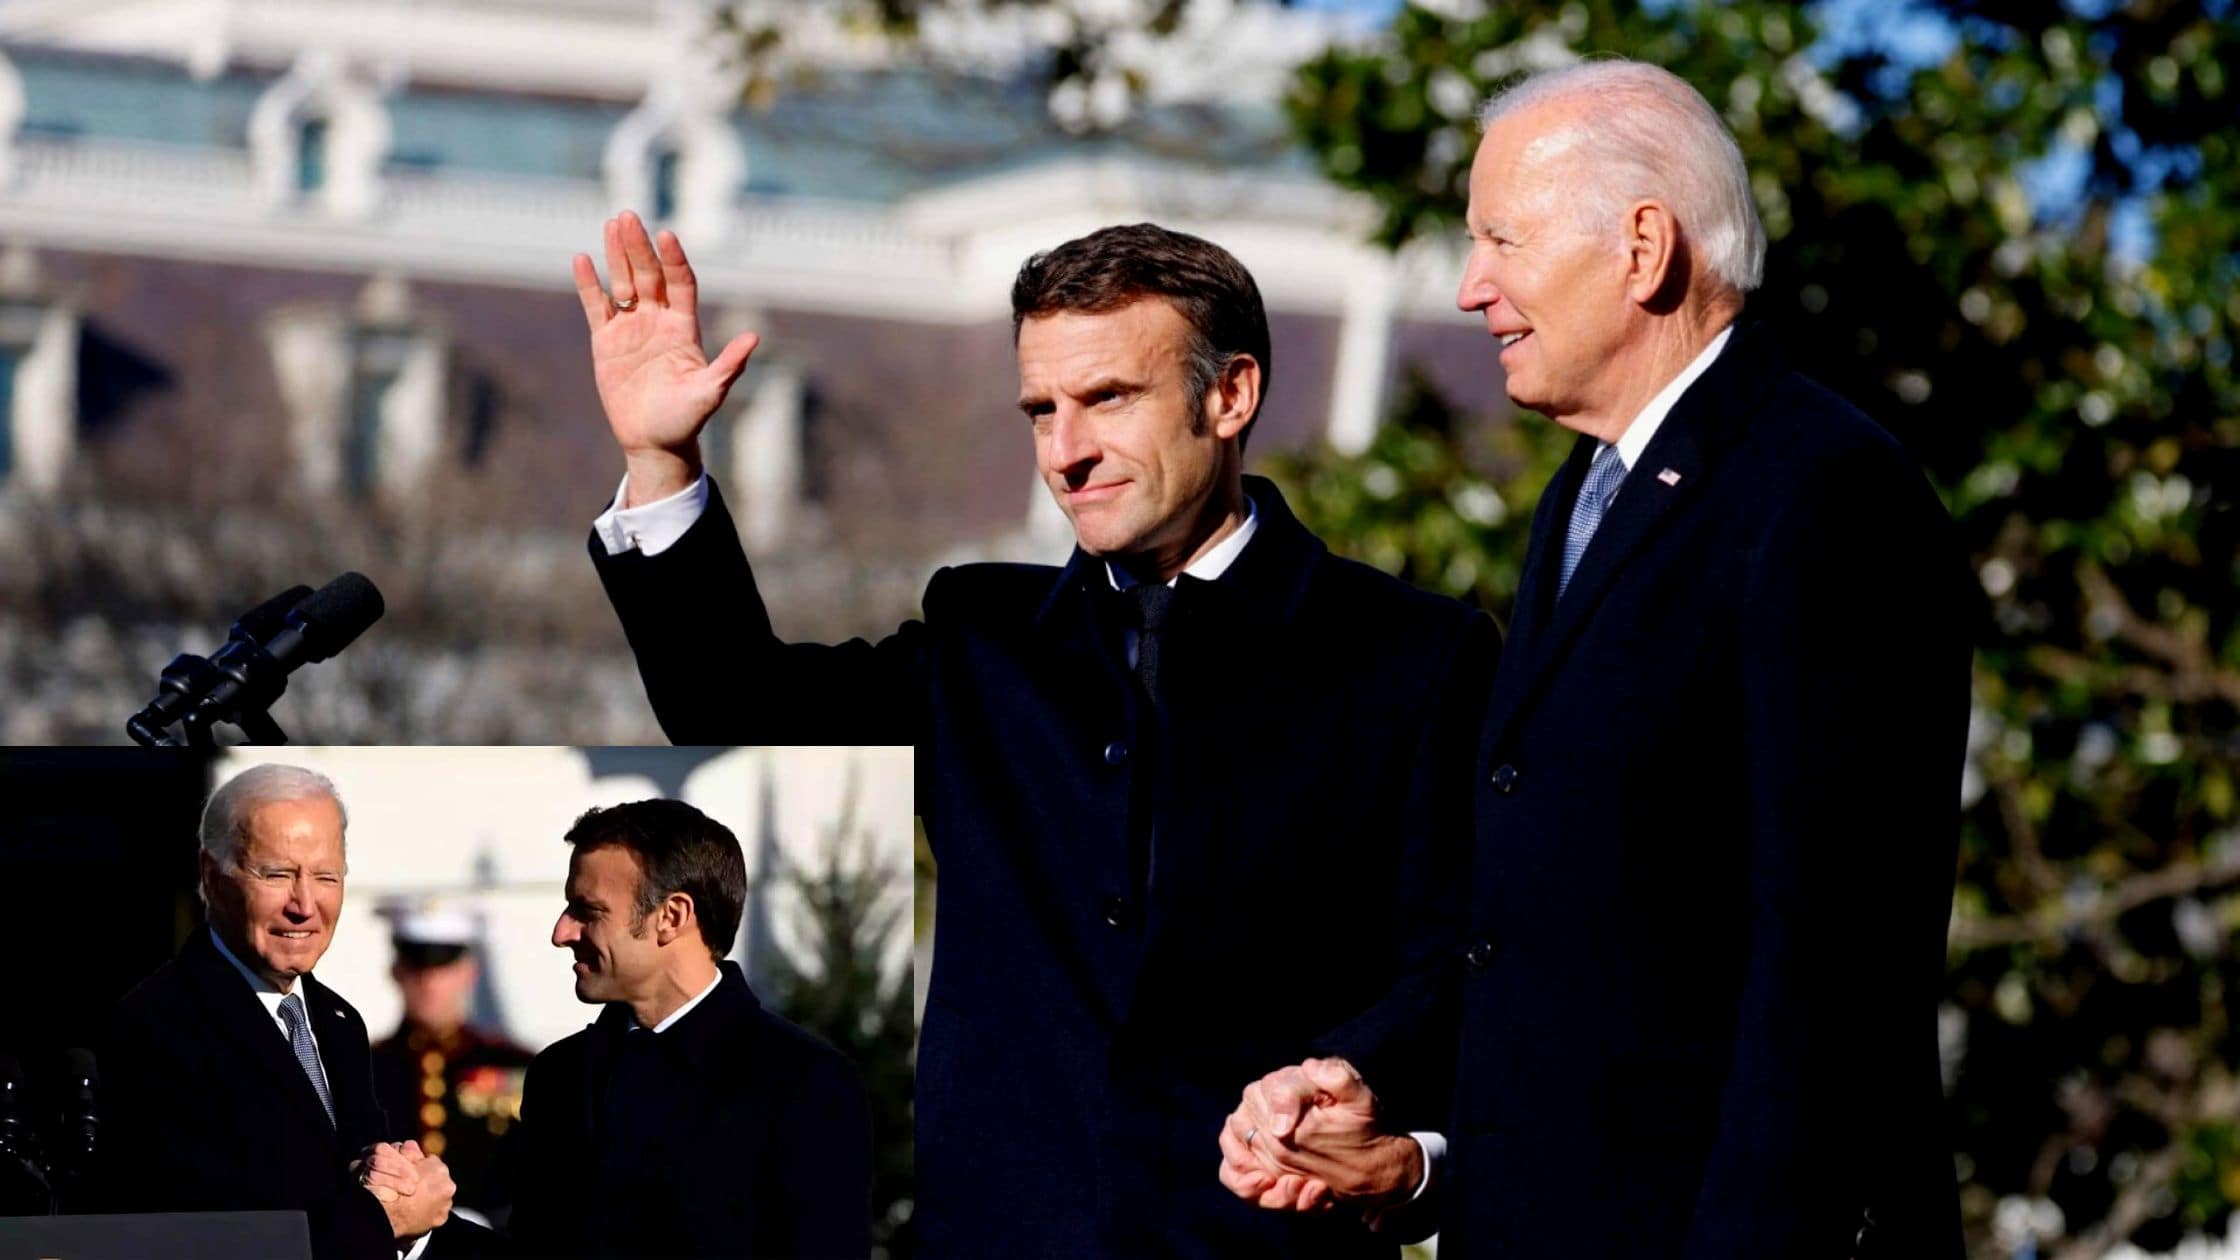 Biden To Fête Macron At State Dinner As U.S. Reconnects With France